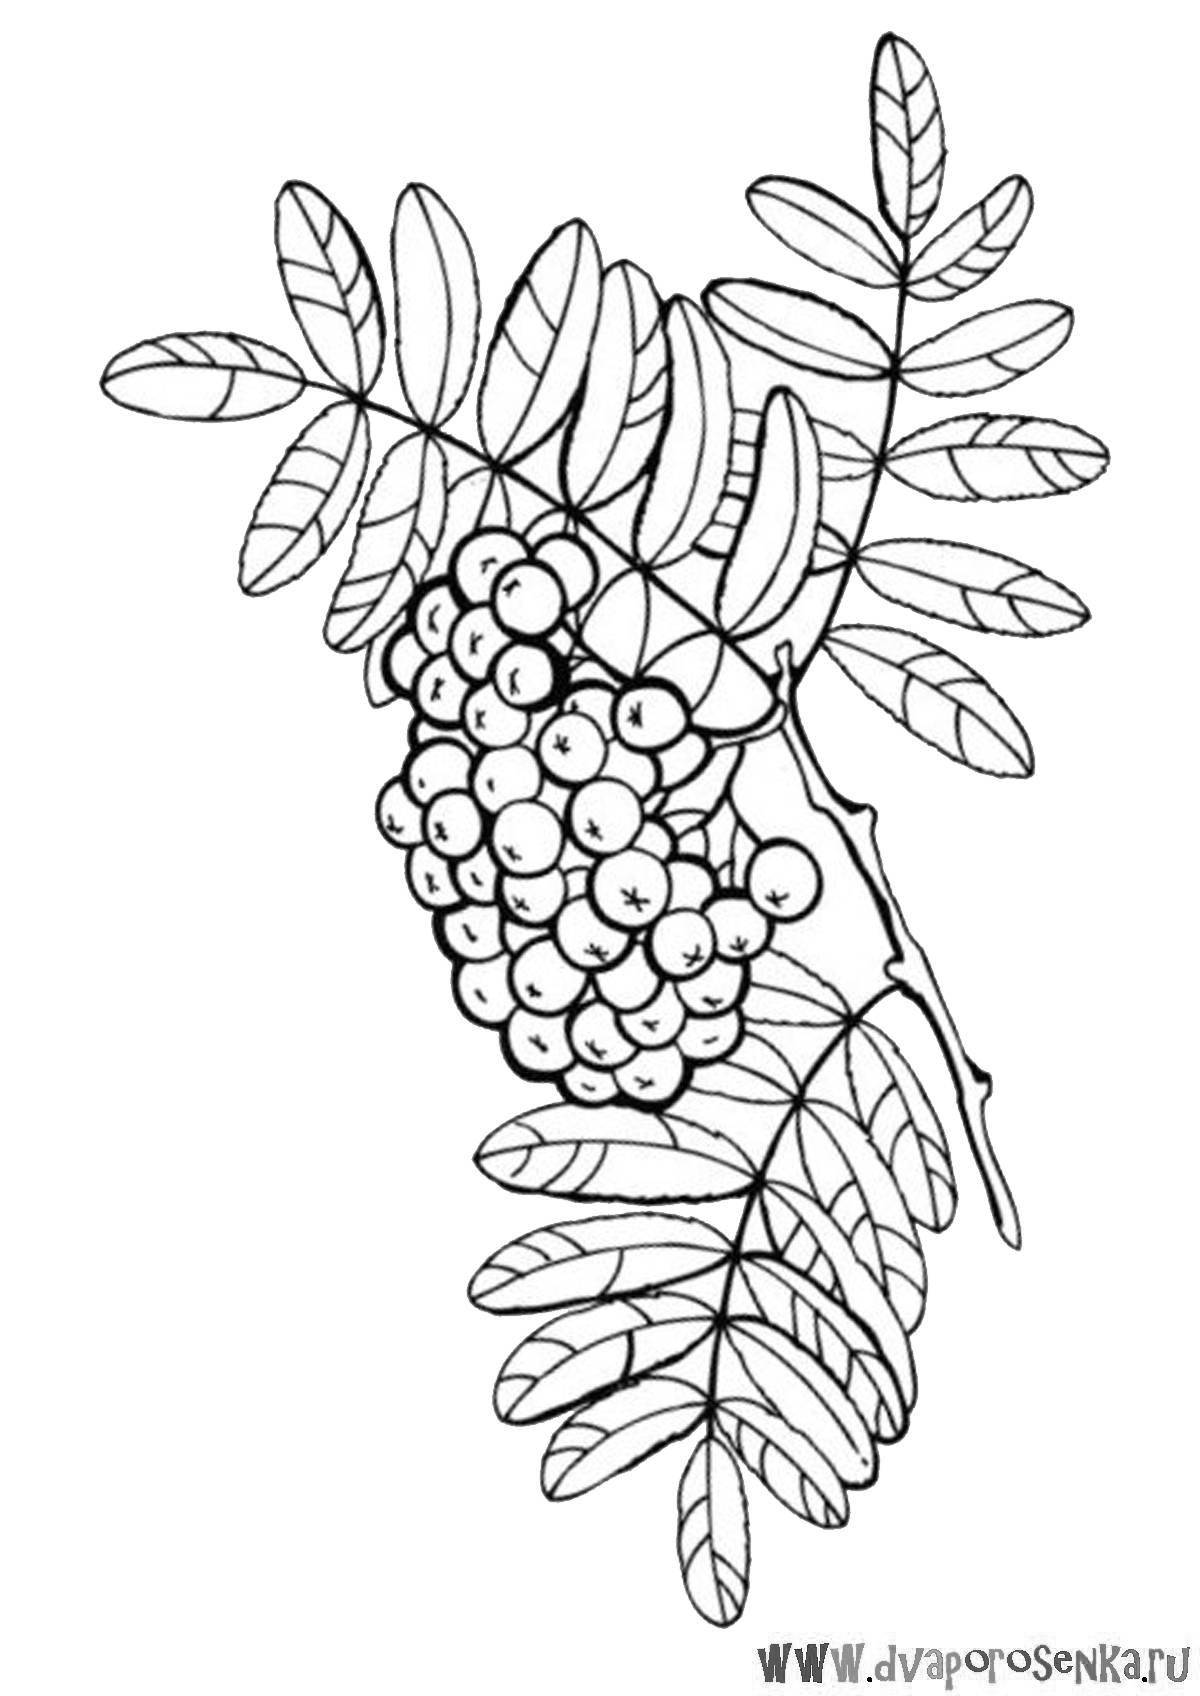 Coloring book playful rowan branch for children